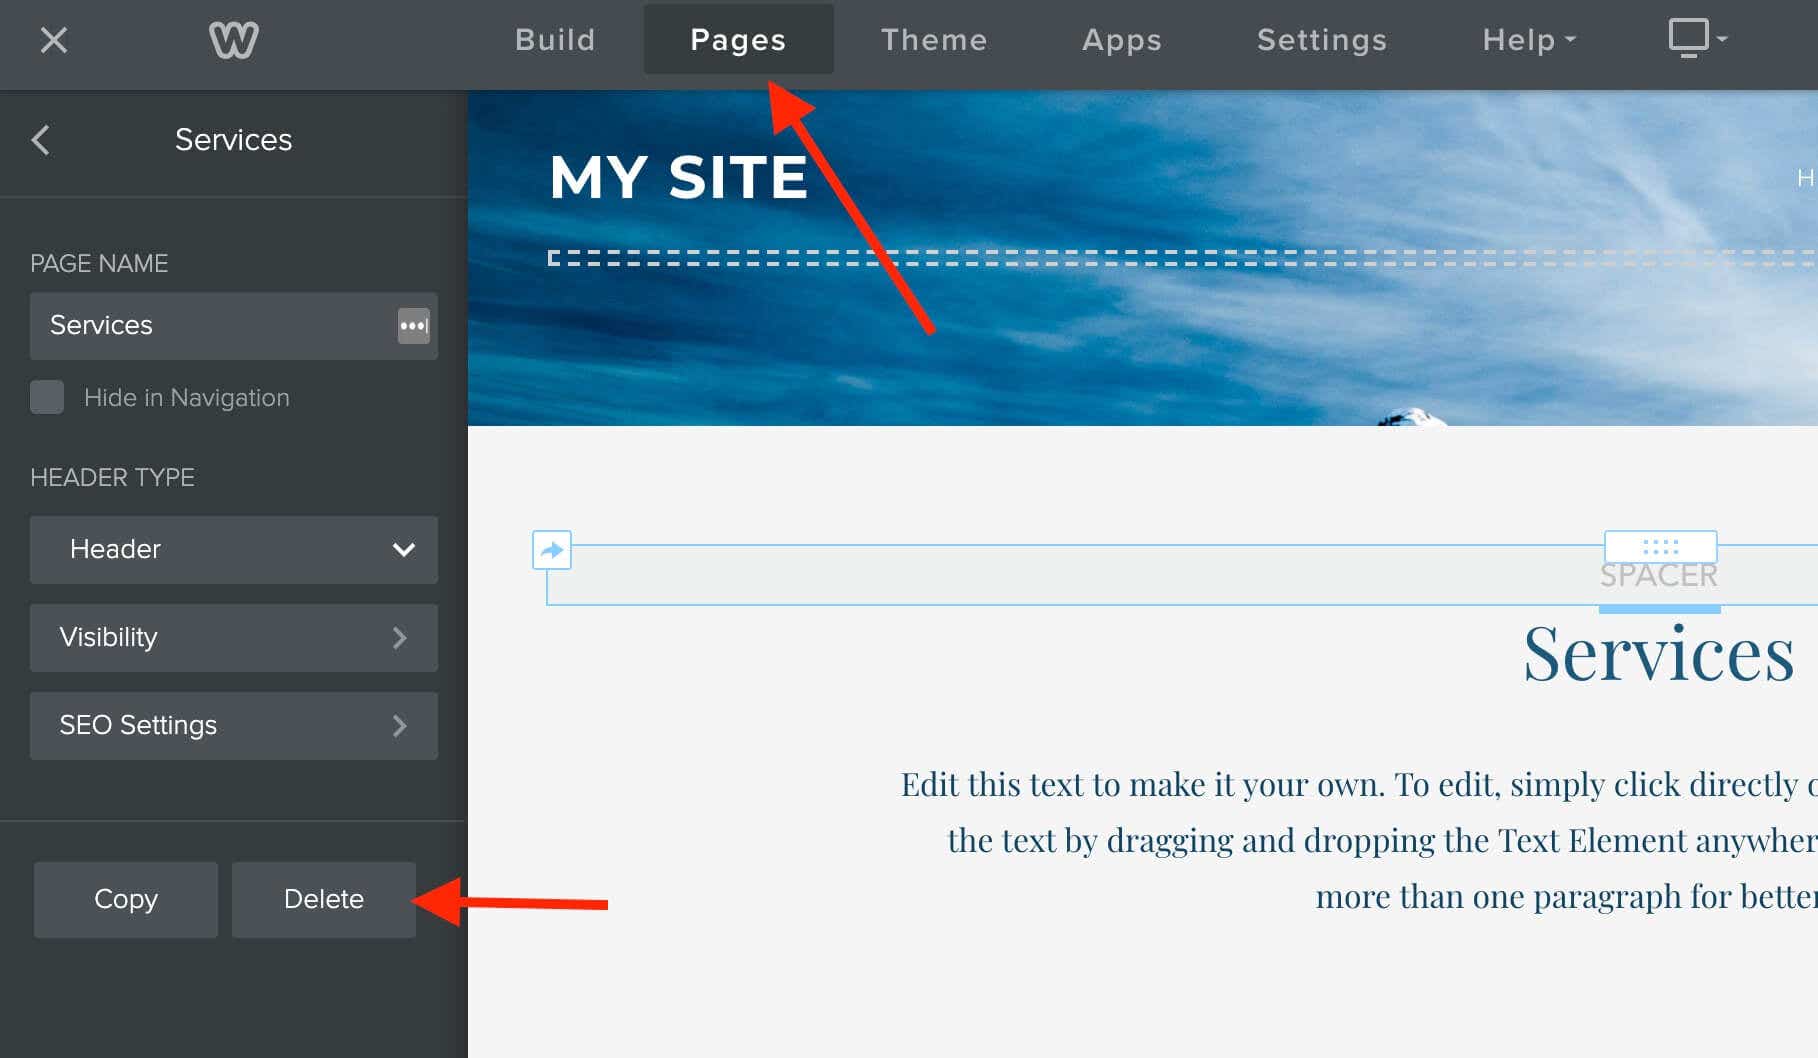 how to build a church website with weebly